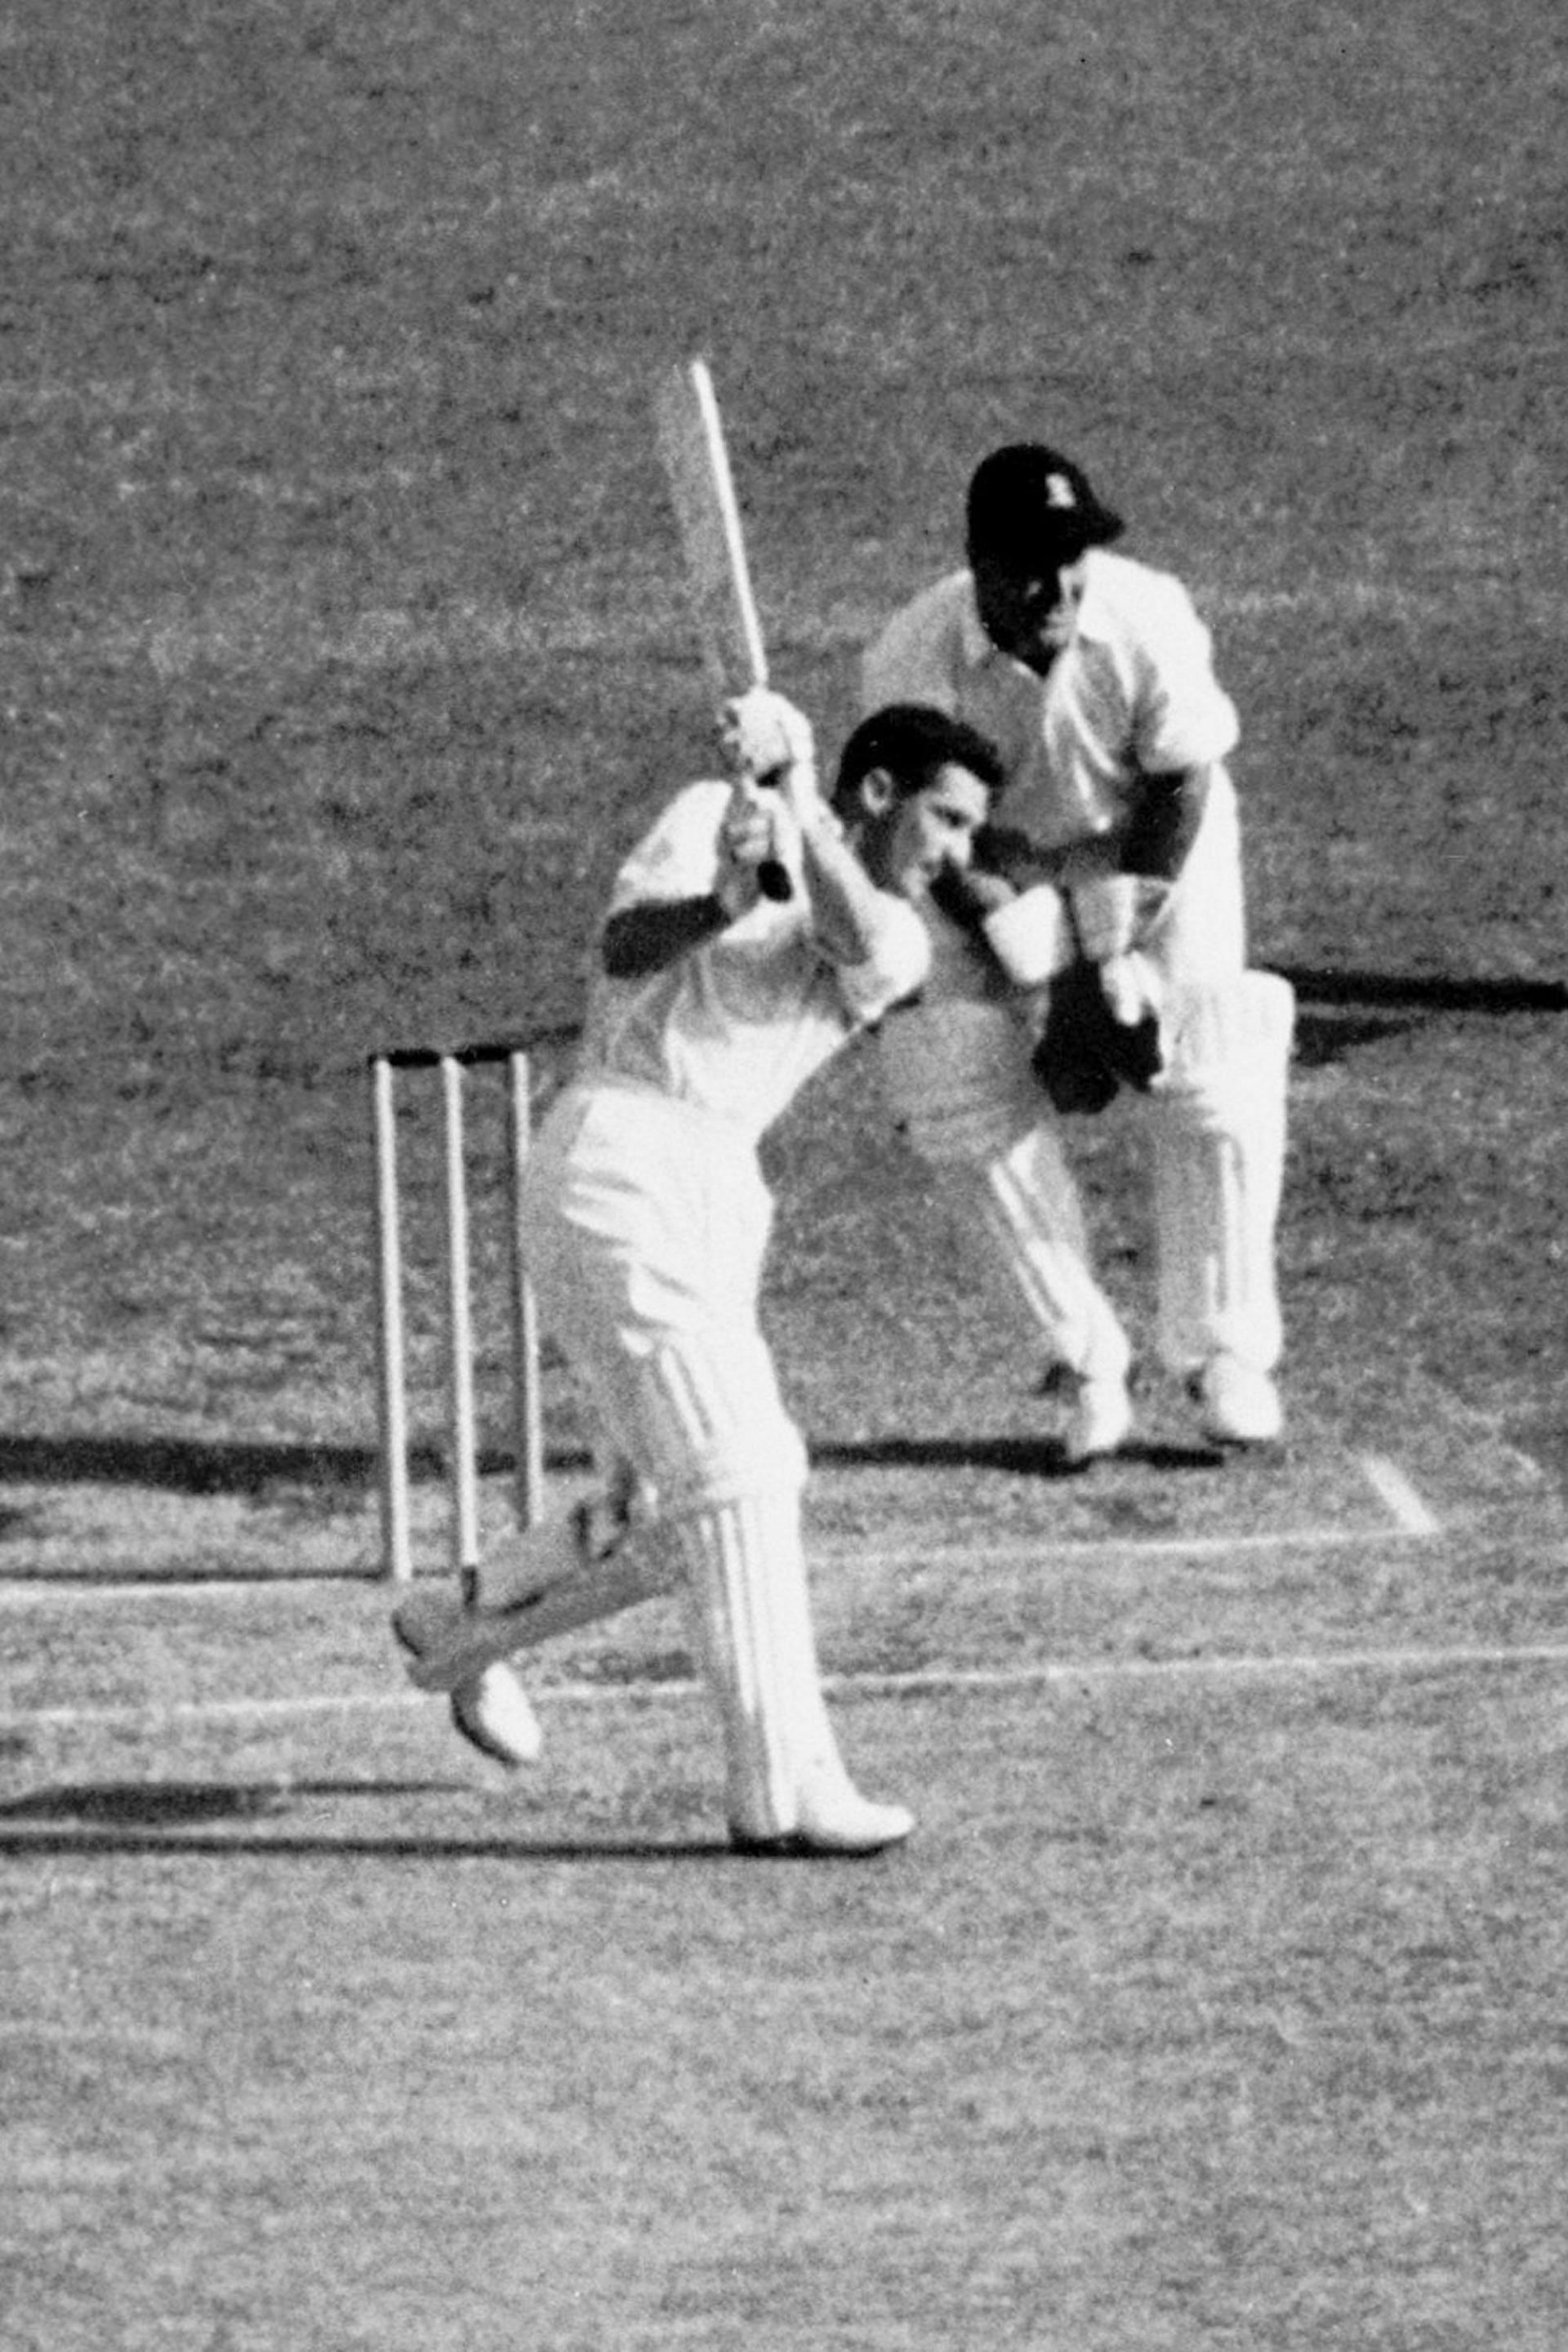 At the slightest opportunity Neil Harvey would skip down the wicket and hammer through the off-side